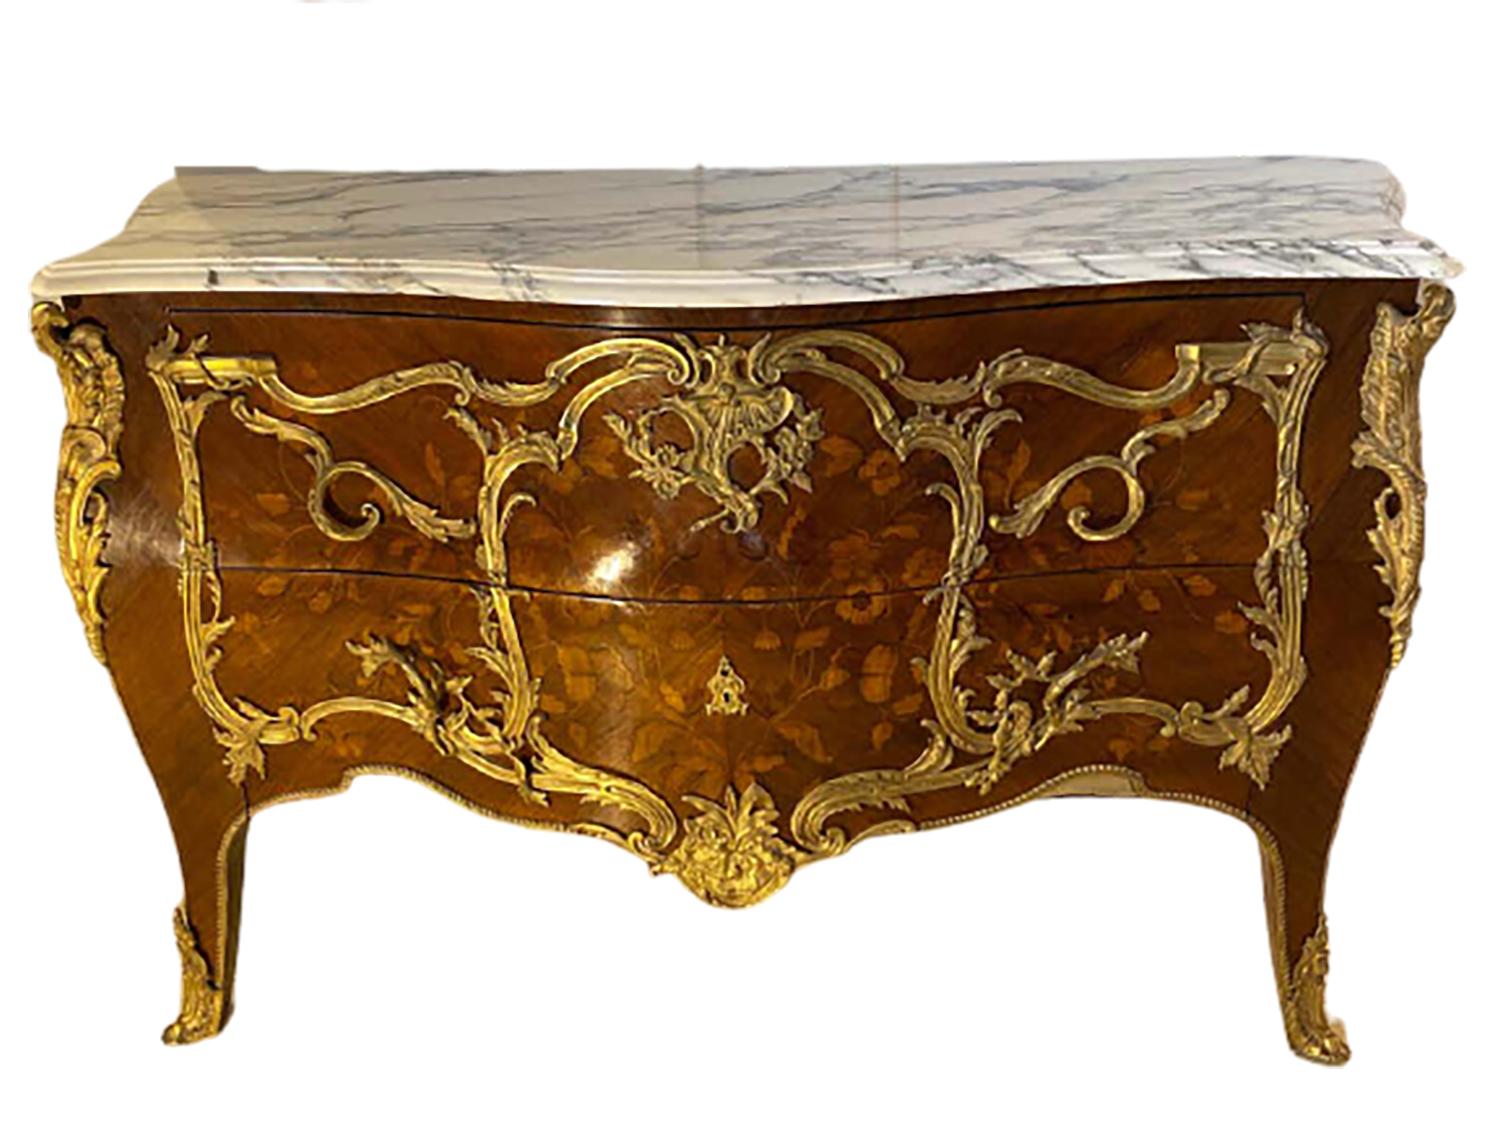 Pair of 19th century king and queen compatible marble-top commodes. Each having a white and grey serpentine marble top above two deep drawers decorated sans traverse and ormolu mounts atop slightly curved legs with bronze sabots. The King with